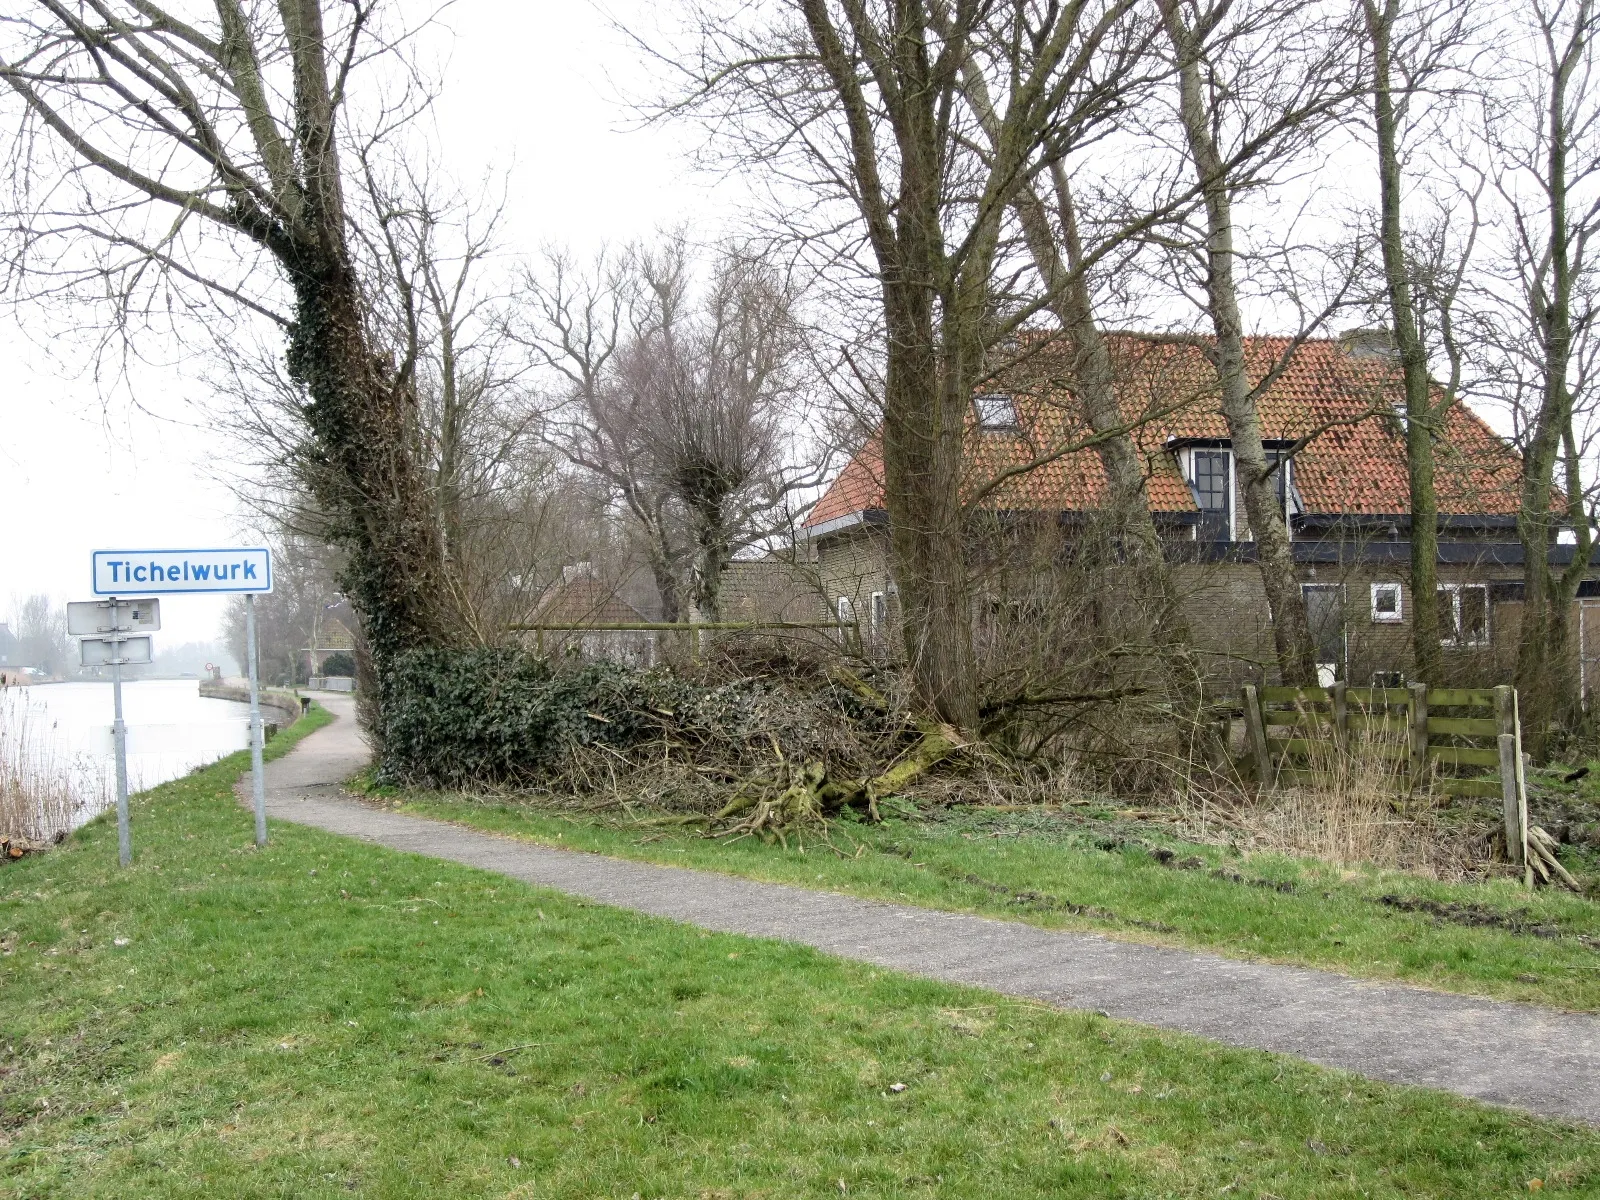 Photo showing: Tichelwurk. County Friesland, The Netherlands. North entrance with former school.